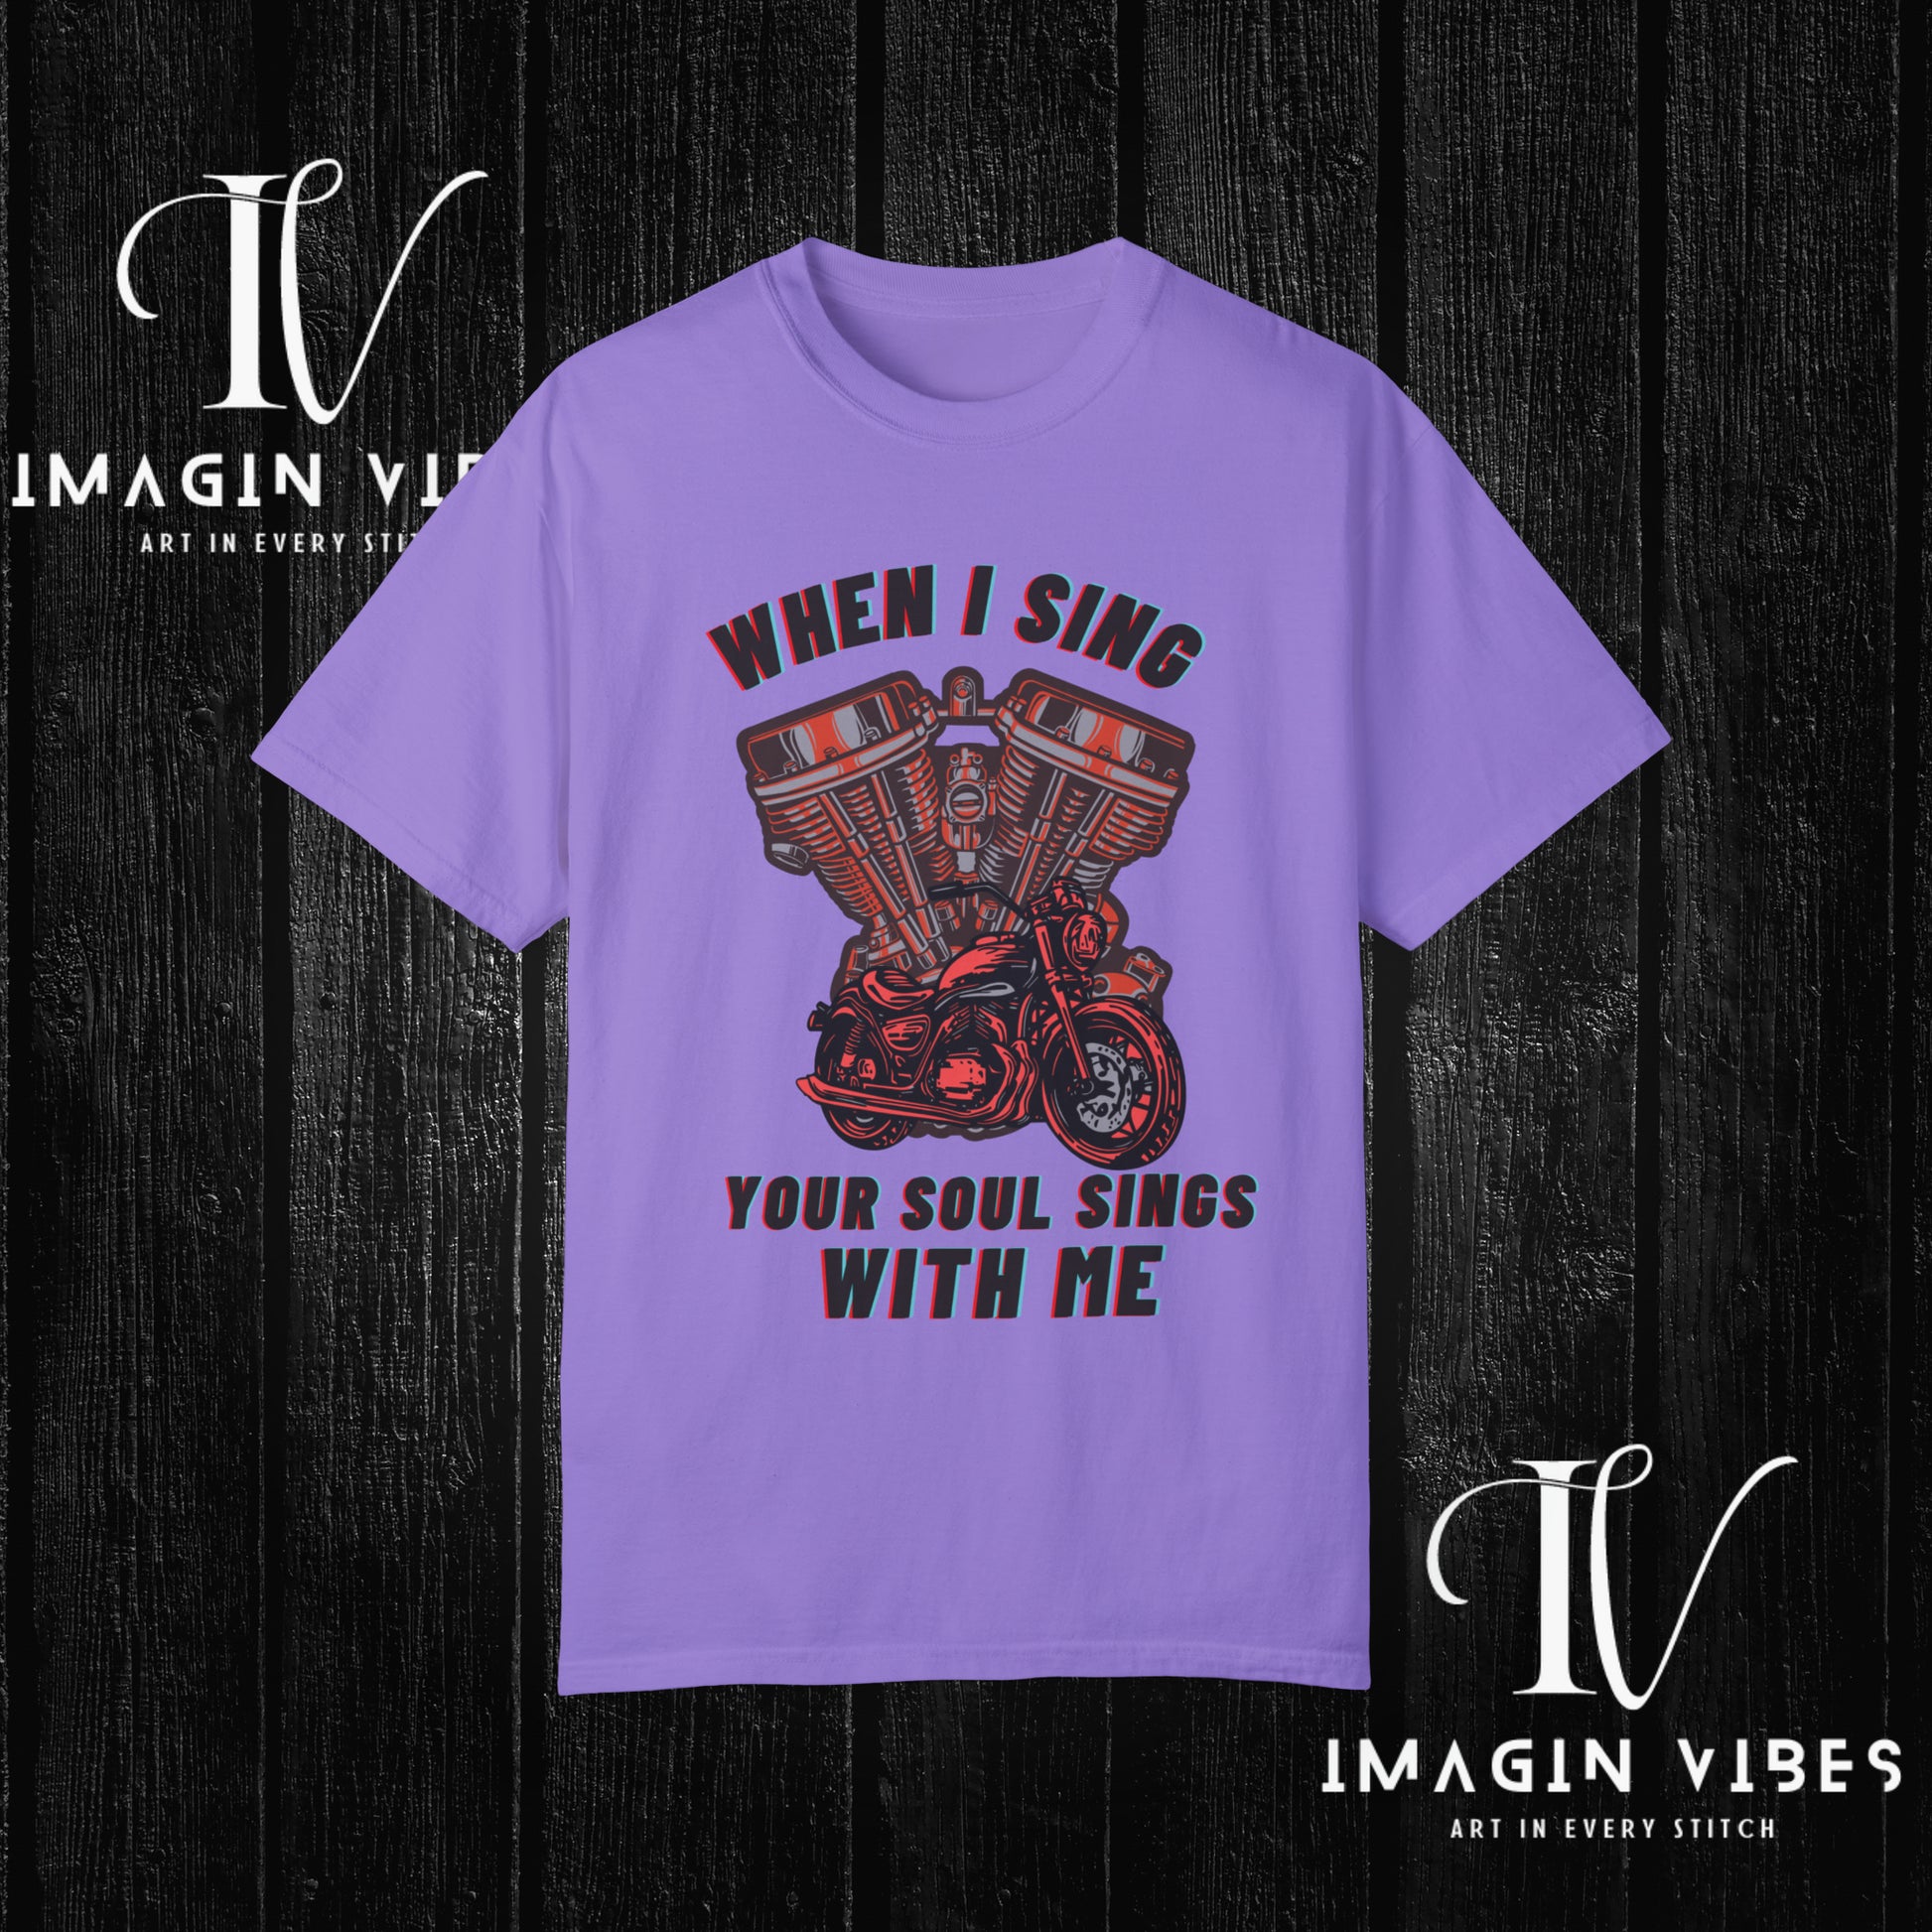 Motorcycle Unisex T-shirt - When I Sing, Your Soul Sings With Me - Motorcycle Riding Shirt, Biker Tee, Cool Biker Shirt USA T-Shirt Violet S 